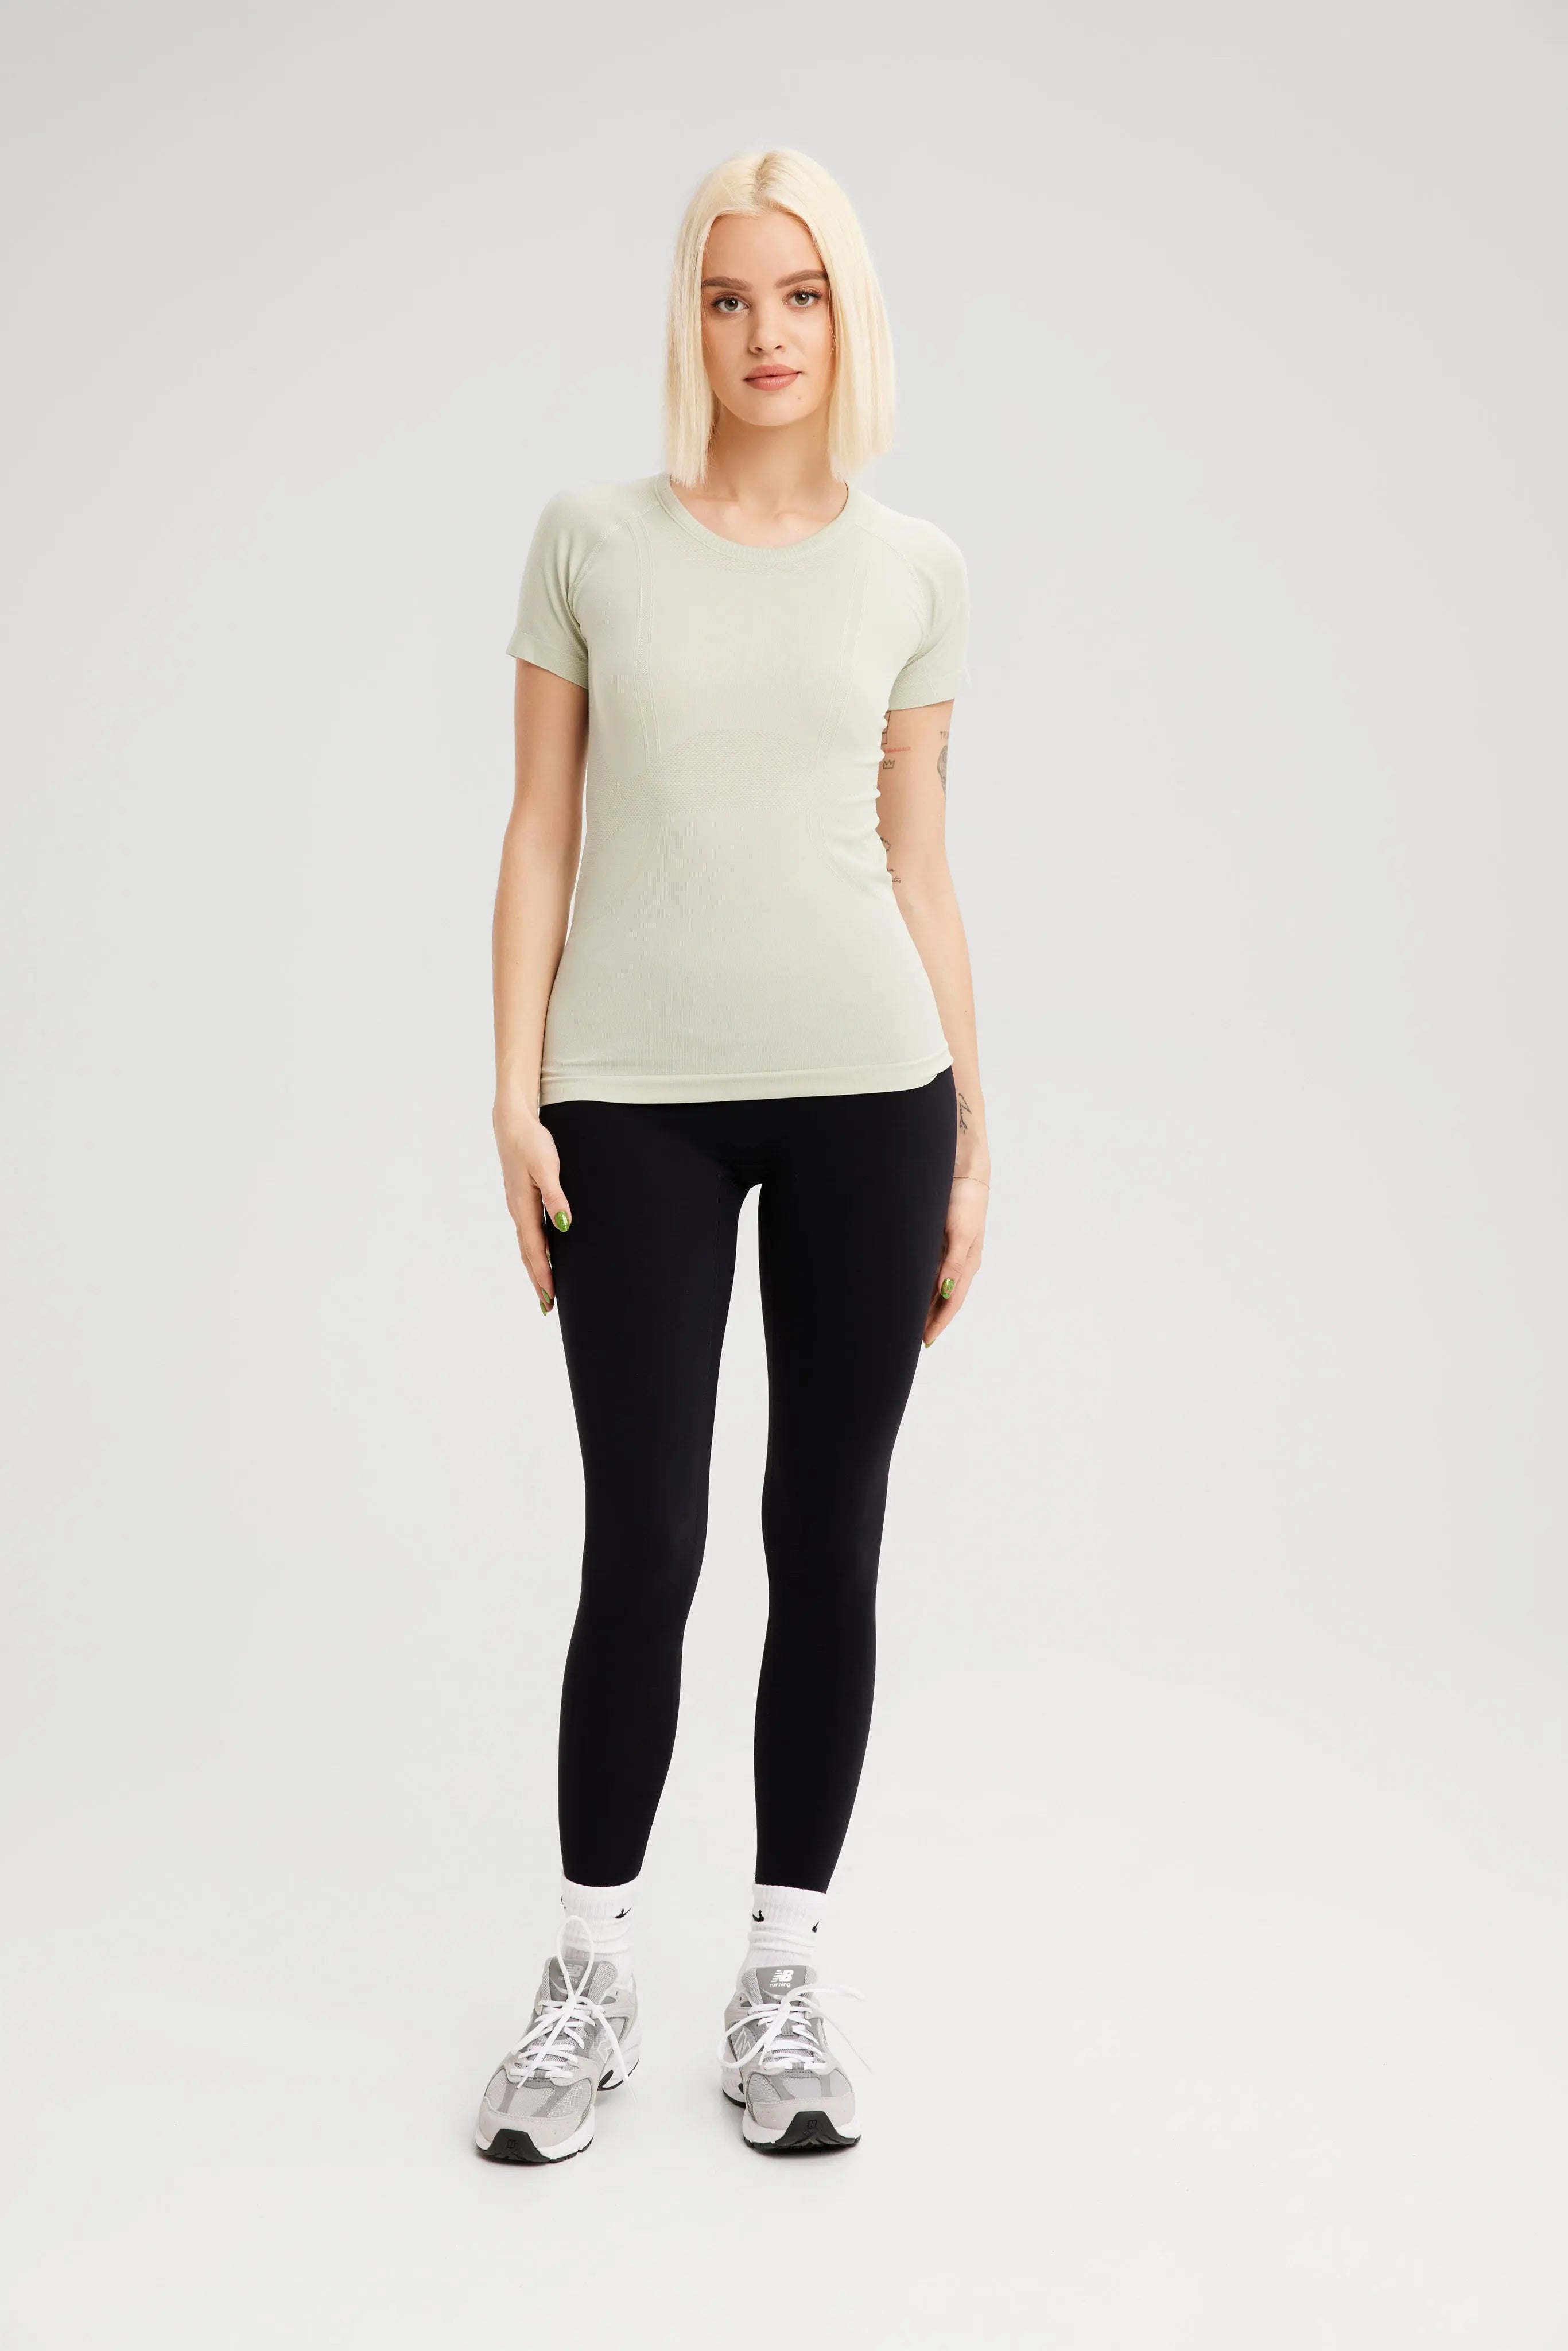 EKJ Women's Active Stretch T-Shirt - Pale Olive My Store